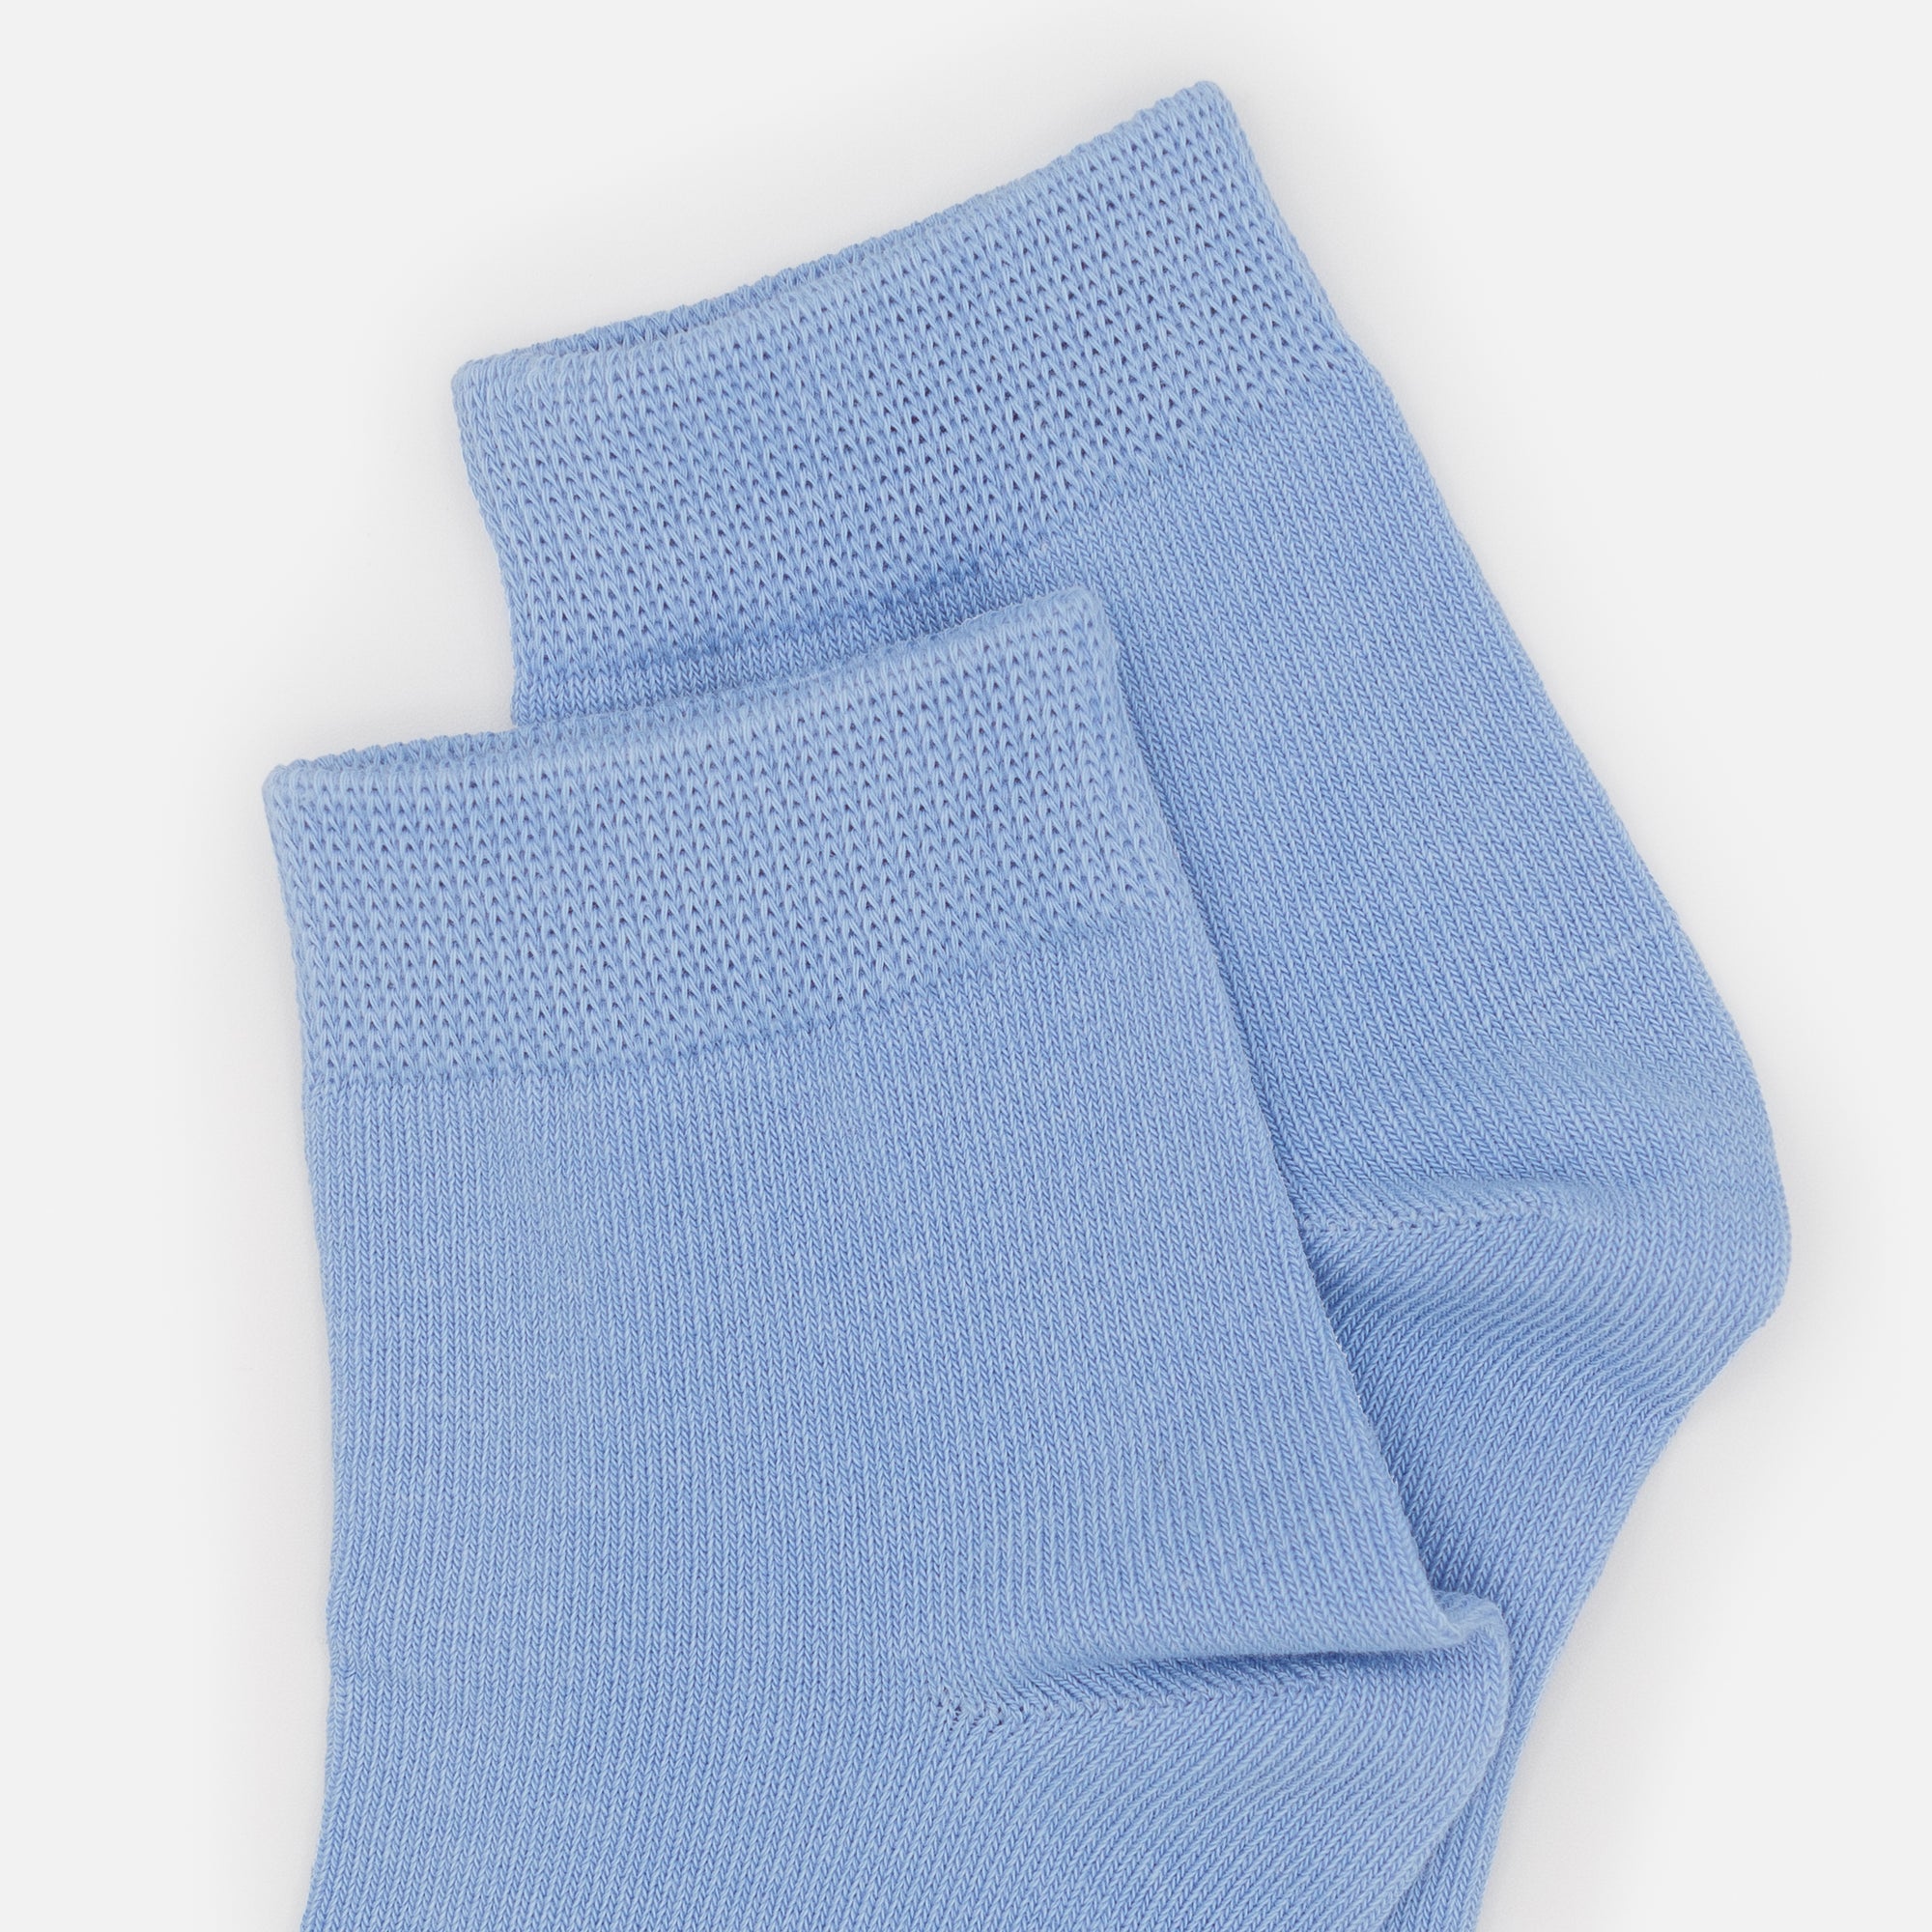 Pale blue mid-length stockings with band trim